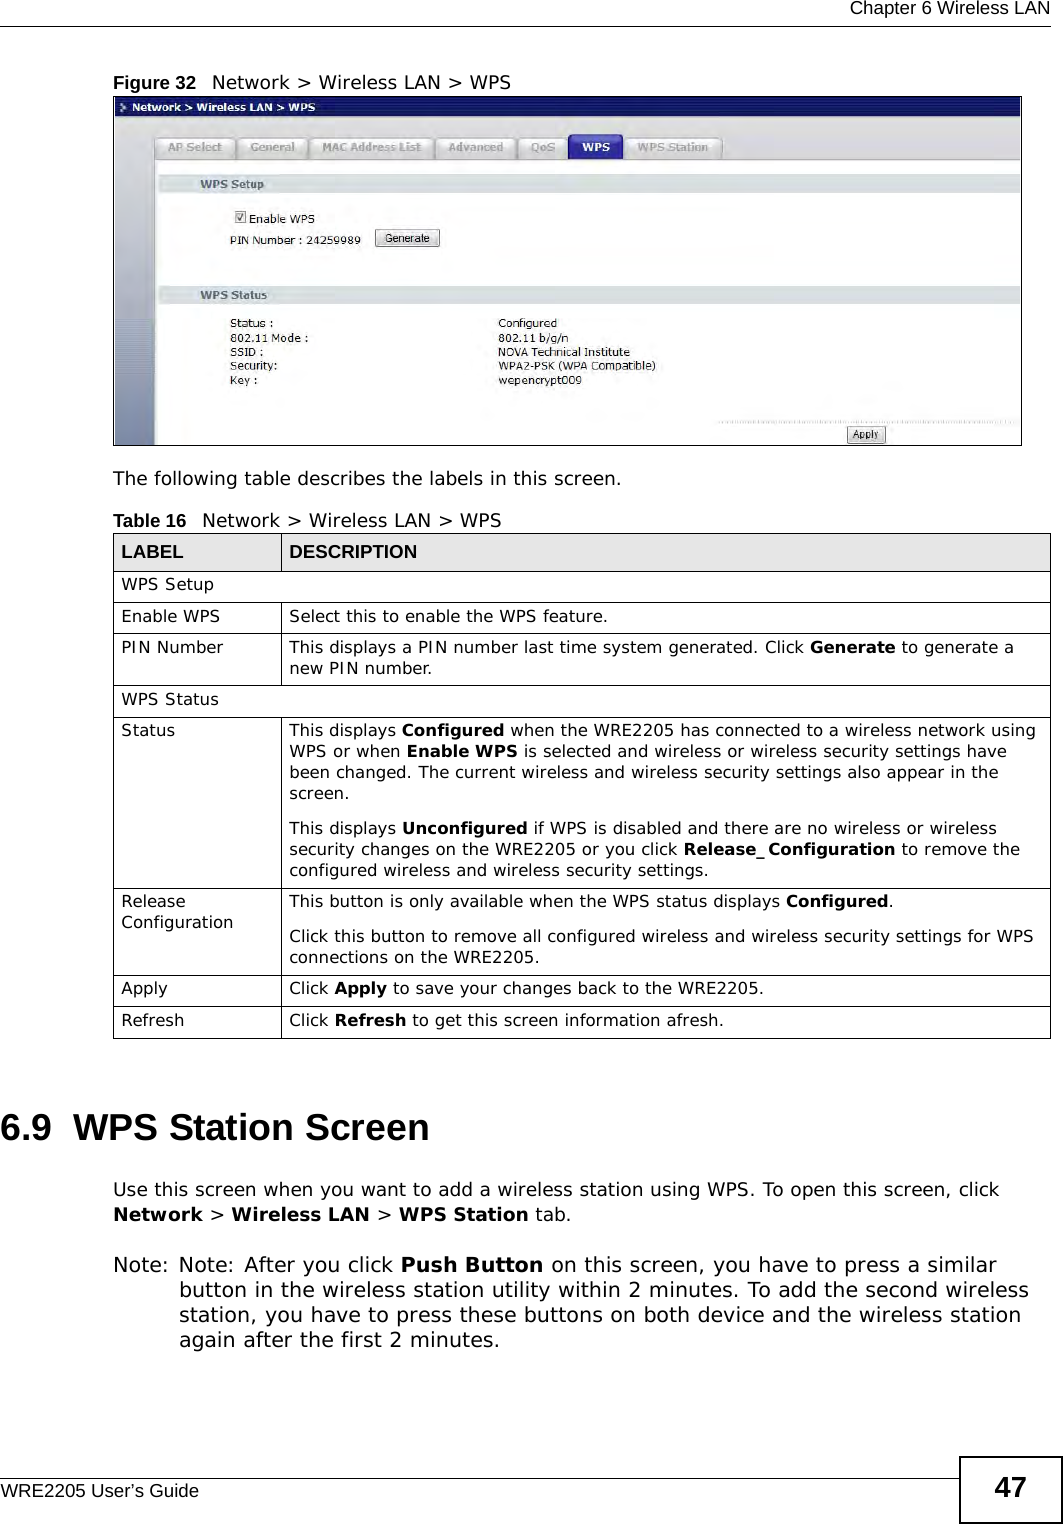  Chapter 6 Wireless LANWRE2205 User’s Guide 47Figure 32   Network &gt; Wireless LAN &gt; WPSThe following table describes the labels in this screen.6.9  WPS Station ScreenUse this screen when you want to add a wireless station using WPS. To open this screen, click Network &gt; Wireless LAN &gt; WPS Station tab.Note: Note: After you click Push Button on this screen, you have to press a similar button in the wireless station utility within 2 minutes. To add the second wireless station, you have to press these buttons on both device and the wireless station again after the first 2 minutes.Table 16   Network &gt; Wireless LAN &gt; WPSLABEL DESCRIPTIONWPS SetupEnable WPS Select this to enable the WPS feature.PIN Number This displays a PIN number last time system generated. Click Generate to generate a new PIN number.WPS StatusStatus This displays Configured when the WRE2205 has connected to a wireless network using WPS or when Enable WPS is selected and wireless or wireless security settings have been changed. The current wireless and wireless security settings also appear in the screen.This displays Unconfigured if WPS is disabled and there are no wireless or wireless security changes on the WRE2205 or you click Release_Configuration to remove the configured wireless and wireless security settings.Release Configuration This button is only available when the WPS status displays Configured.Click this button to remove all configured wireless and wireless security settings for WPS connections on the WRE2205.Apply Click Apply to save your changes back to the WRE2205.Refresh Click Refresh to get this screen information afresh.